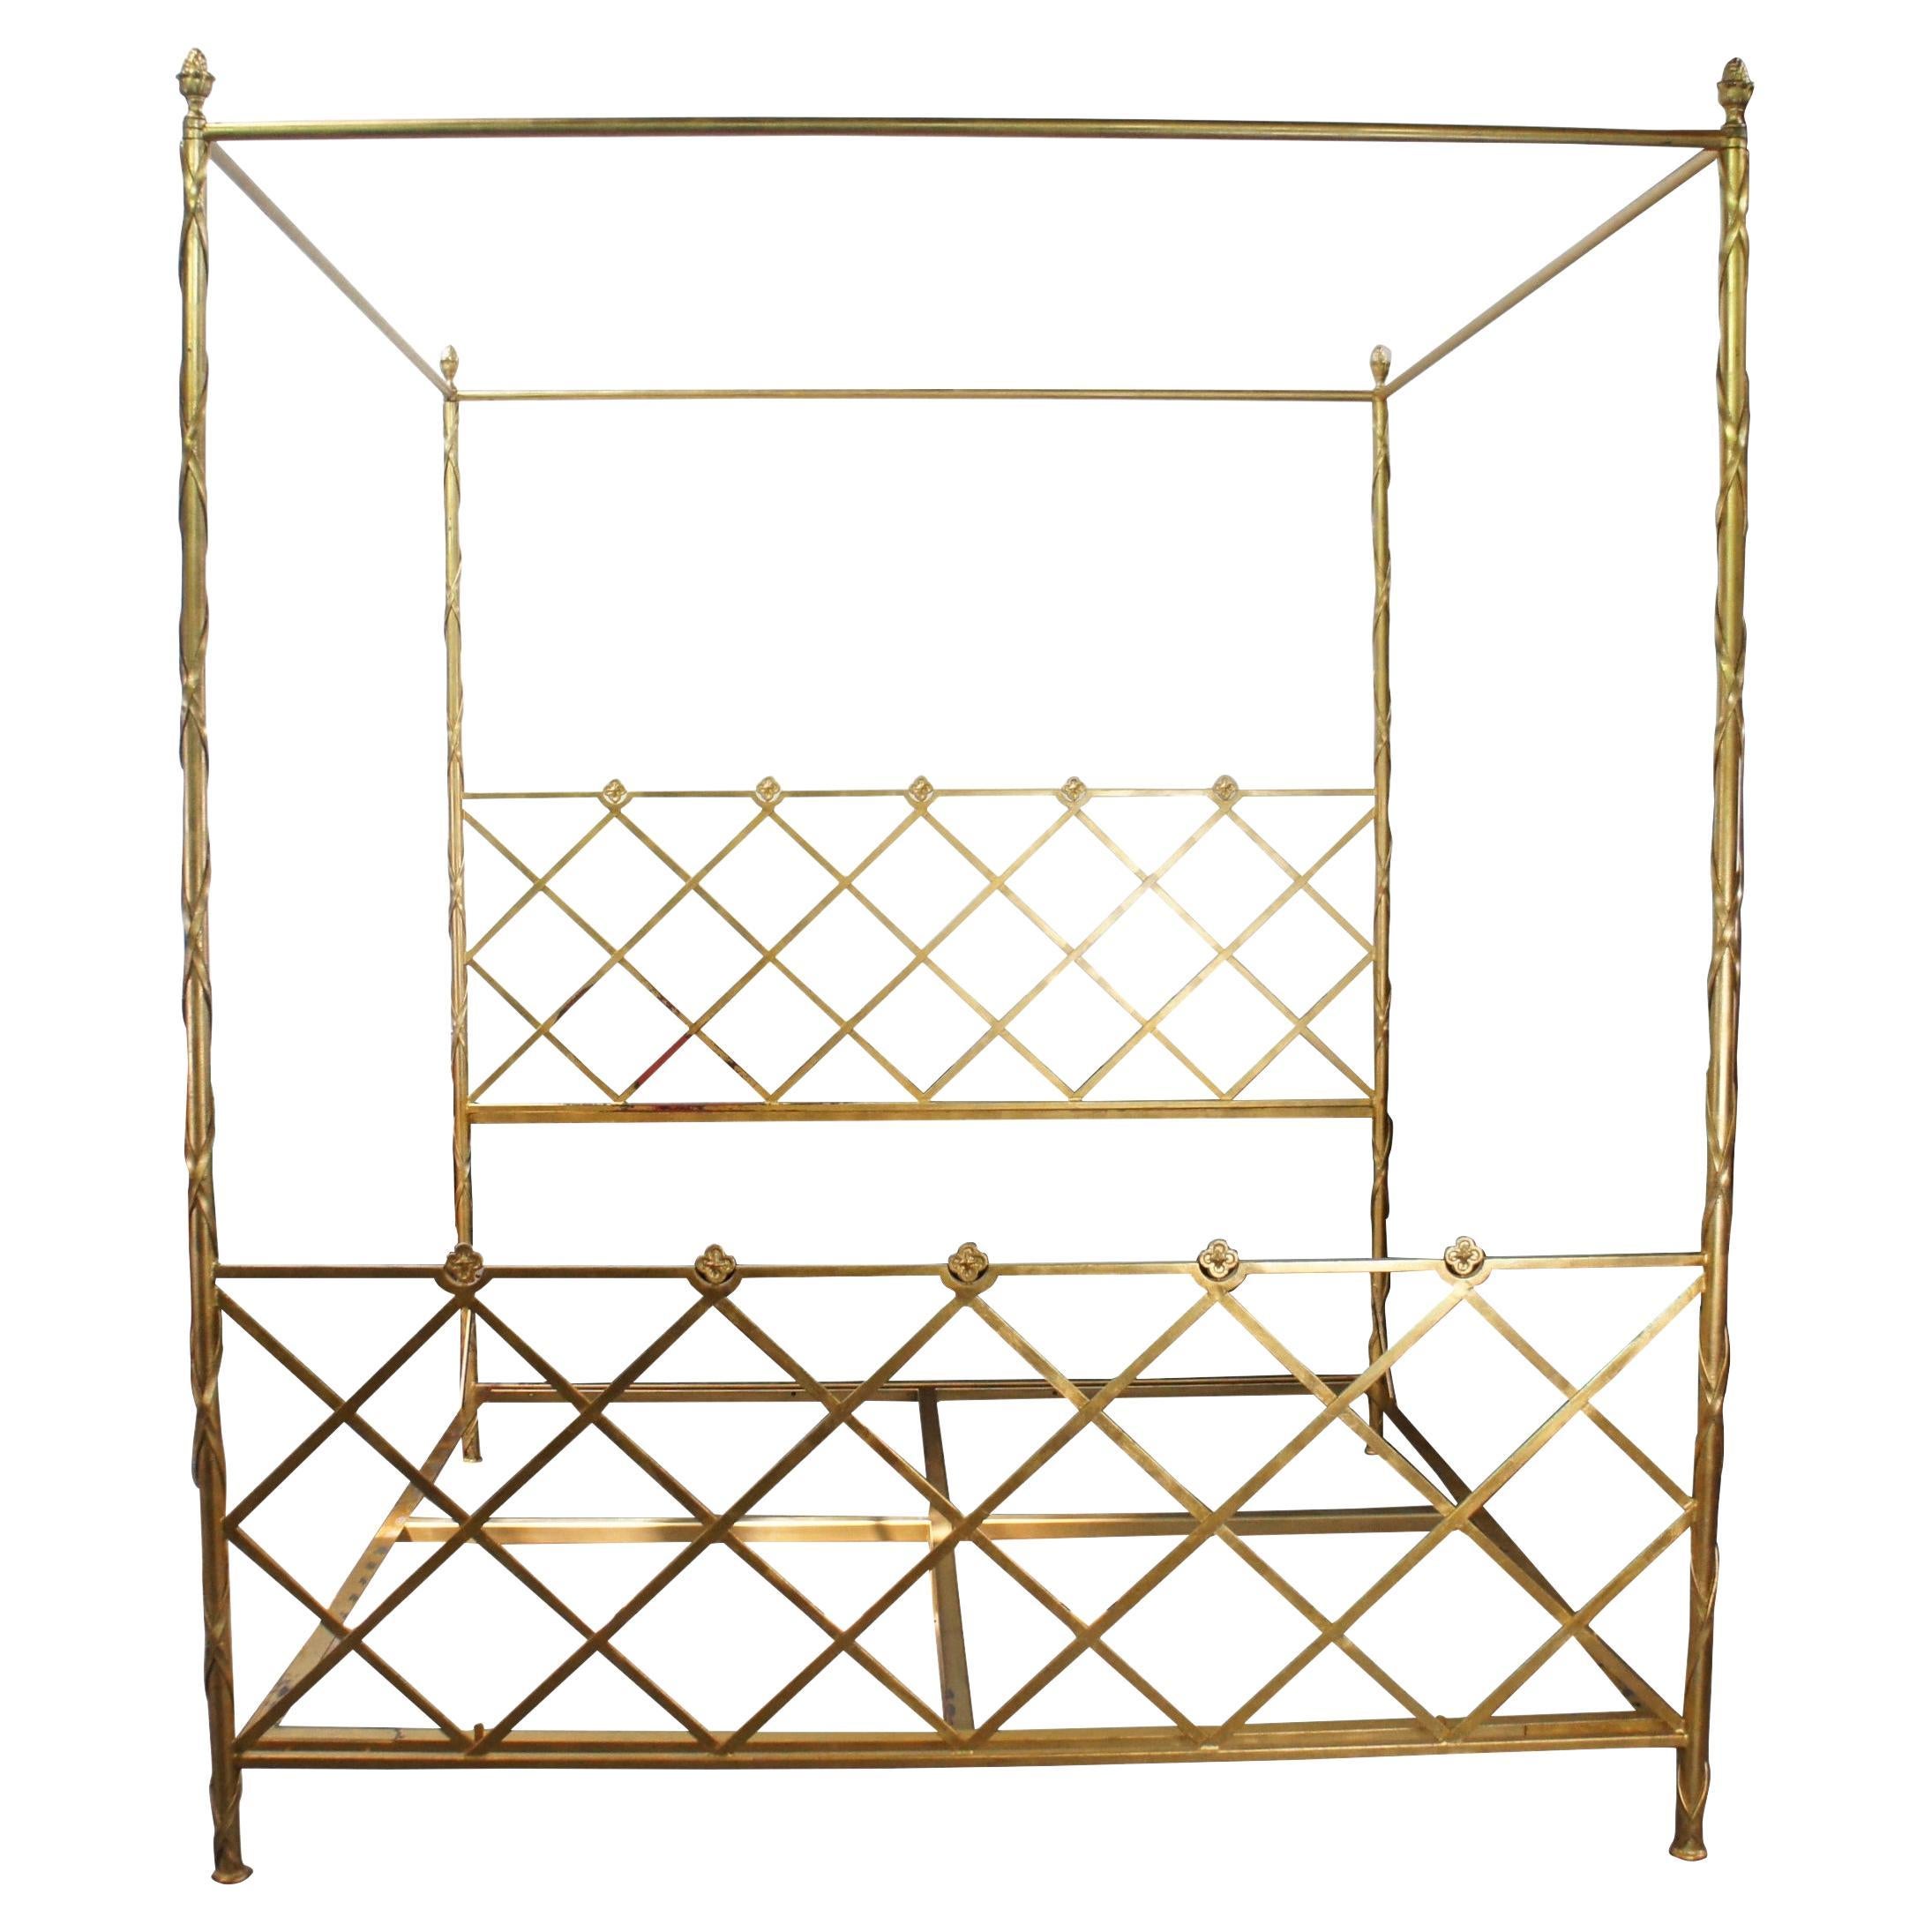 Vintage Neoclassical Modern Gold Leaf King Size Poster Bed Lattice Tester Canopy For Sale